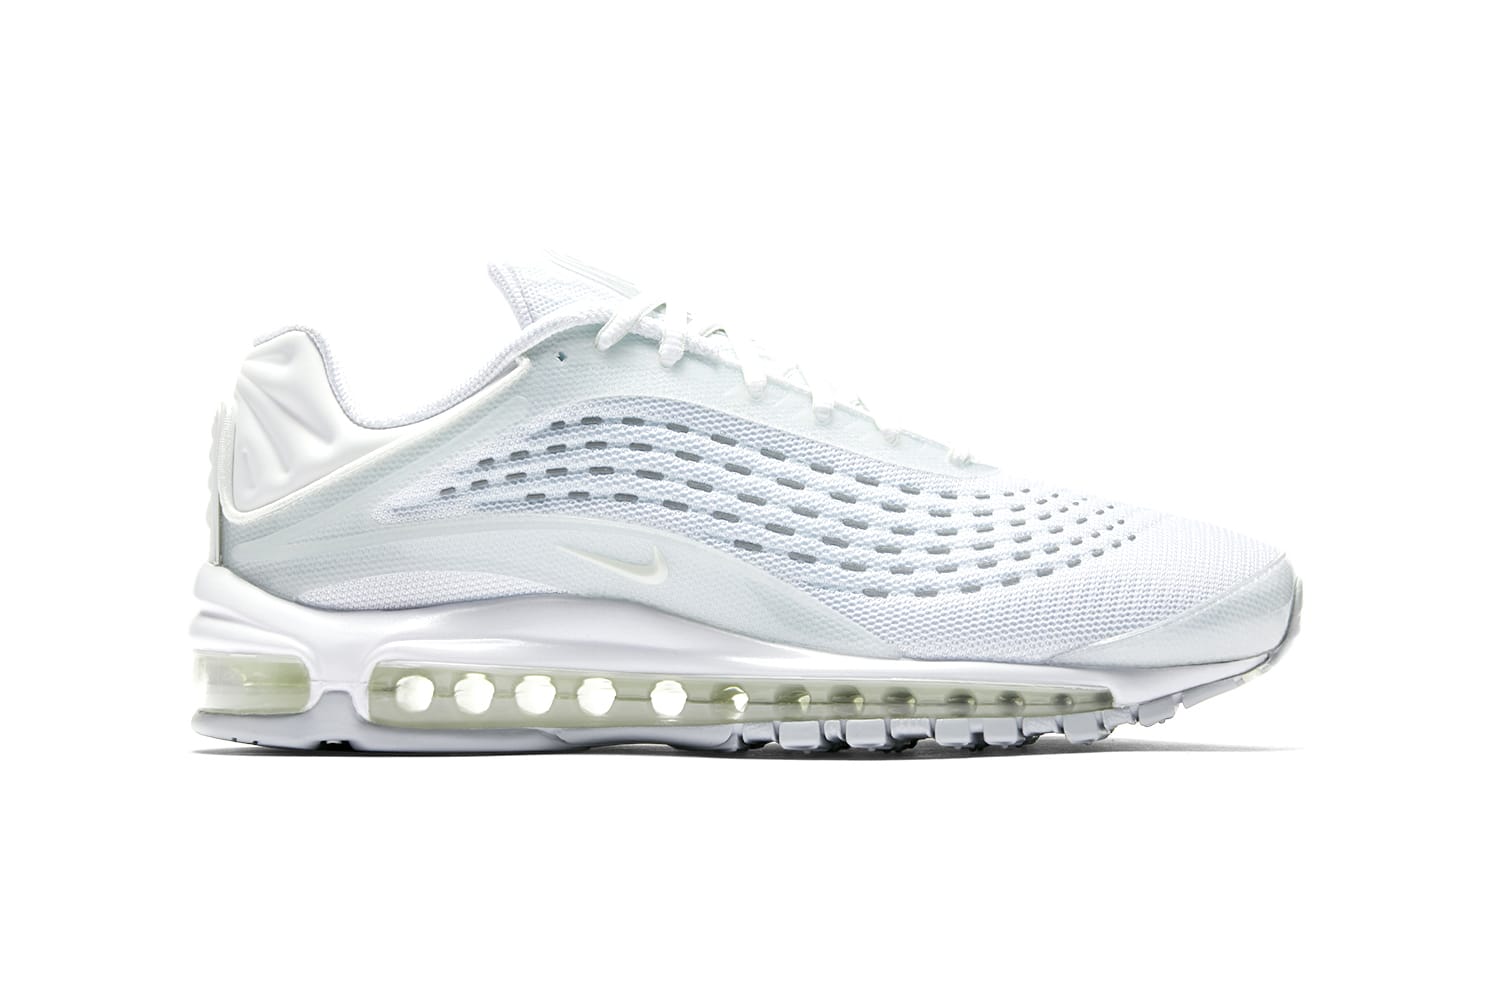 Nike Air Max Deluxe in Triple White | HYPEBEAST